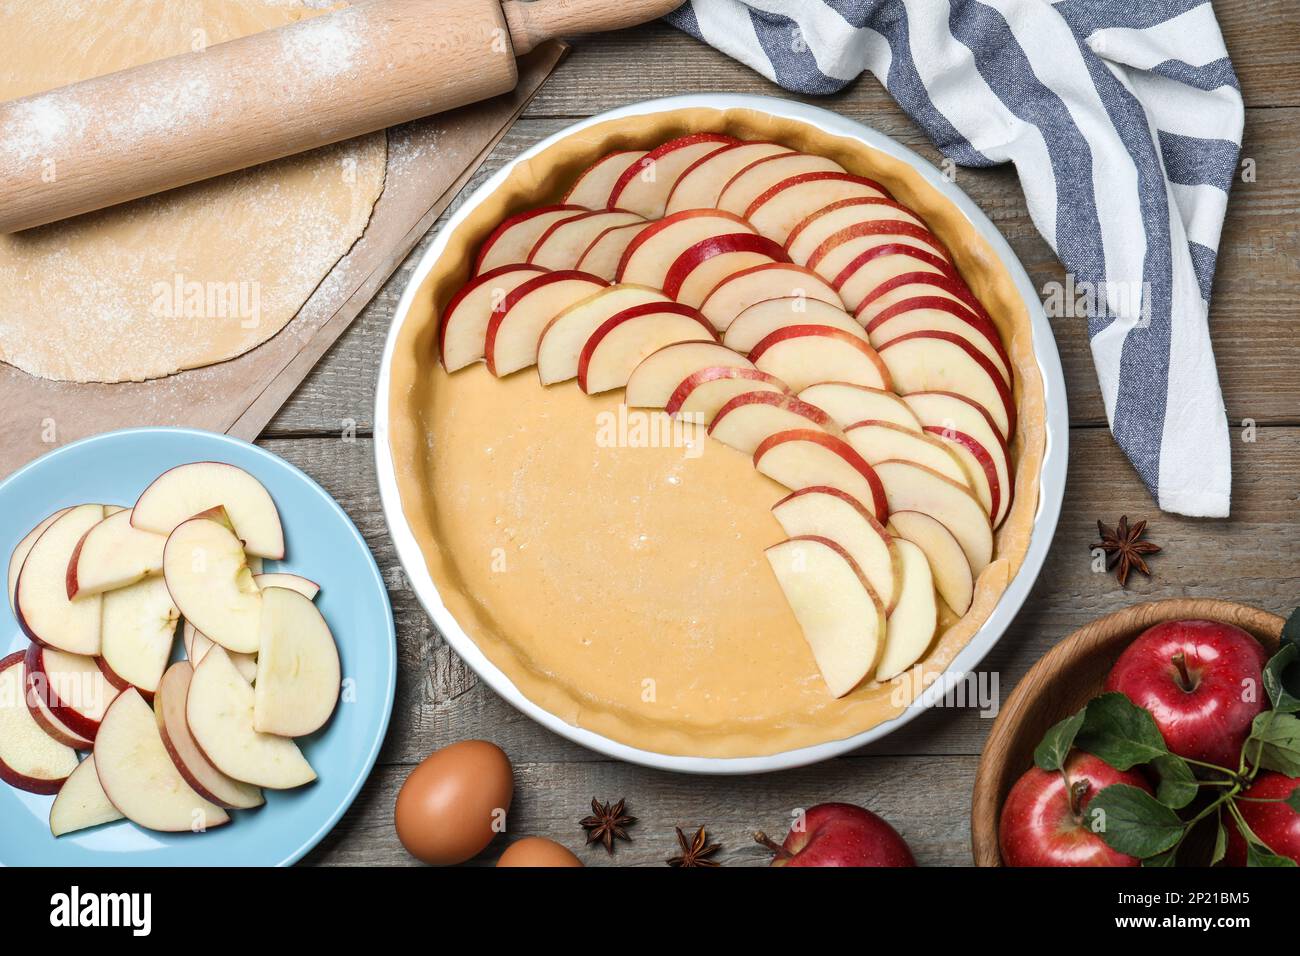 Dish with fresh apple slices and raw dough on wooden table, flat lay. Baking pie Stock Photo